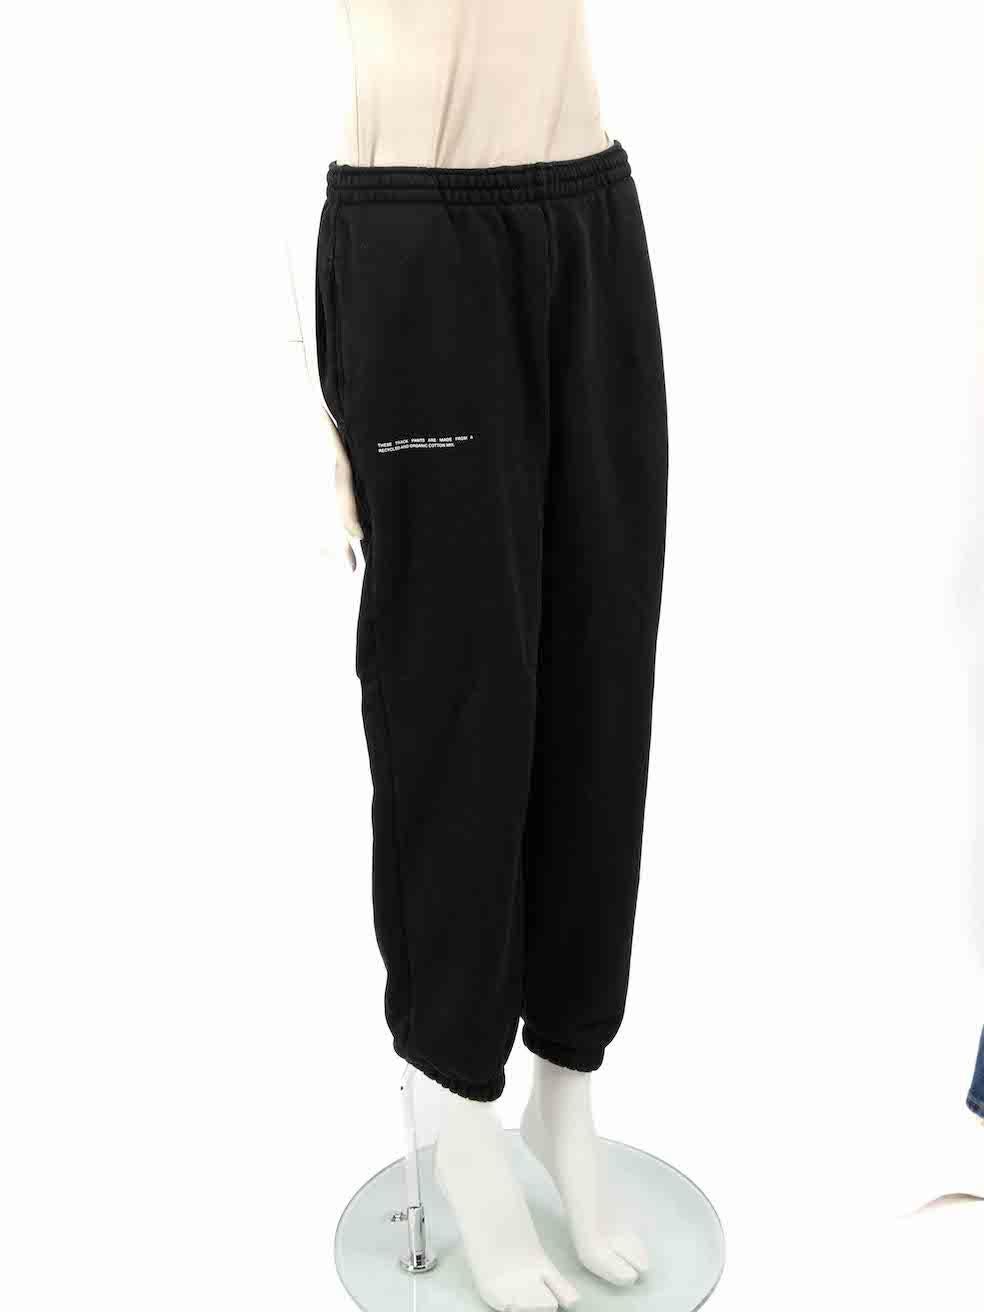 ConditionCONDITION is Very good. Hardly any visible wear to trousers is evident on this used Pangaia designer resale item.Details
 
  Black
 
 
  Cotton
 
 
  Track trousers
 
 
  Elasticated cuffs
 
 
  Elasticated waistband with drawstring
 
 
 